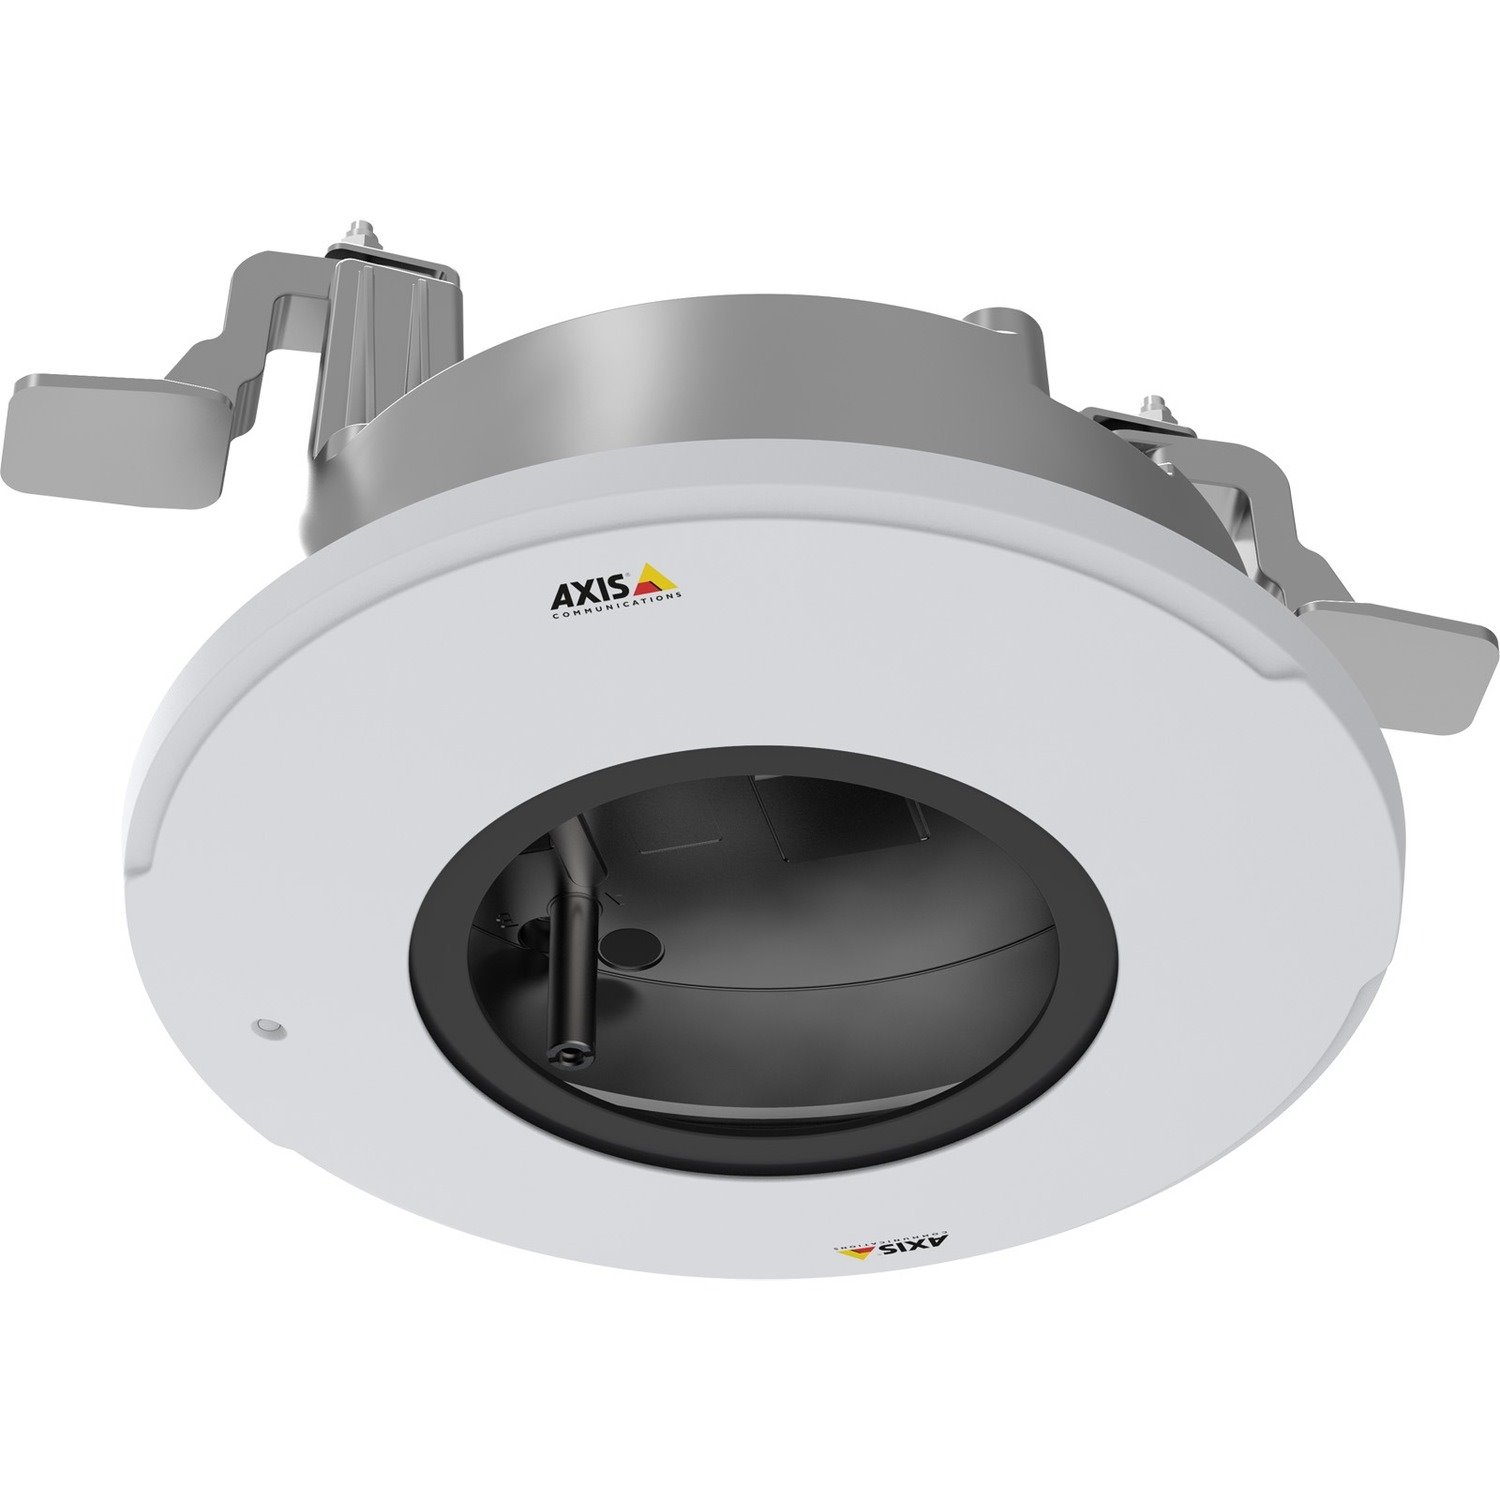 AXIS TP3201 Ceiling Mount for Network Camera